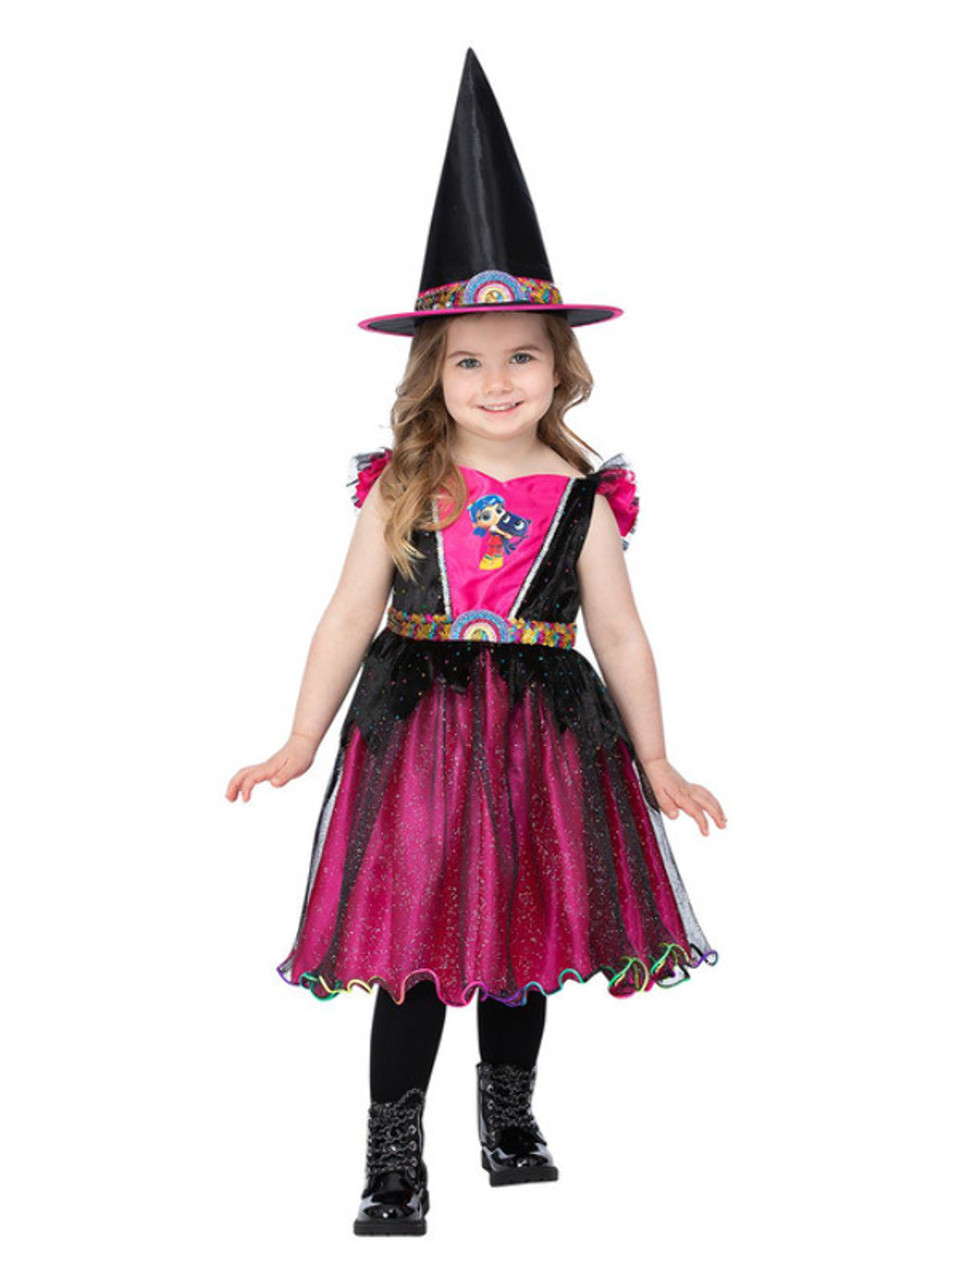 Official Children's Paw Patrol Skye Witch Costume | lupon.gov.ph